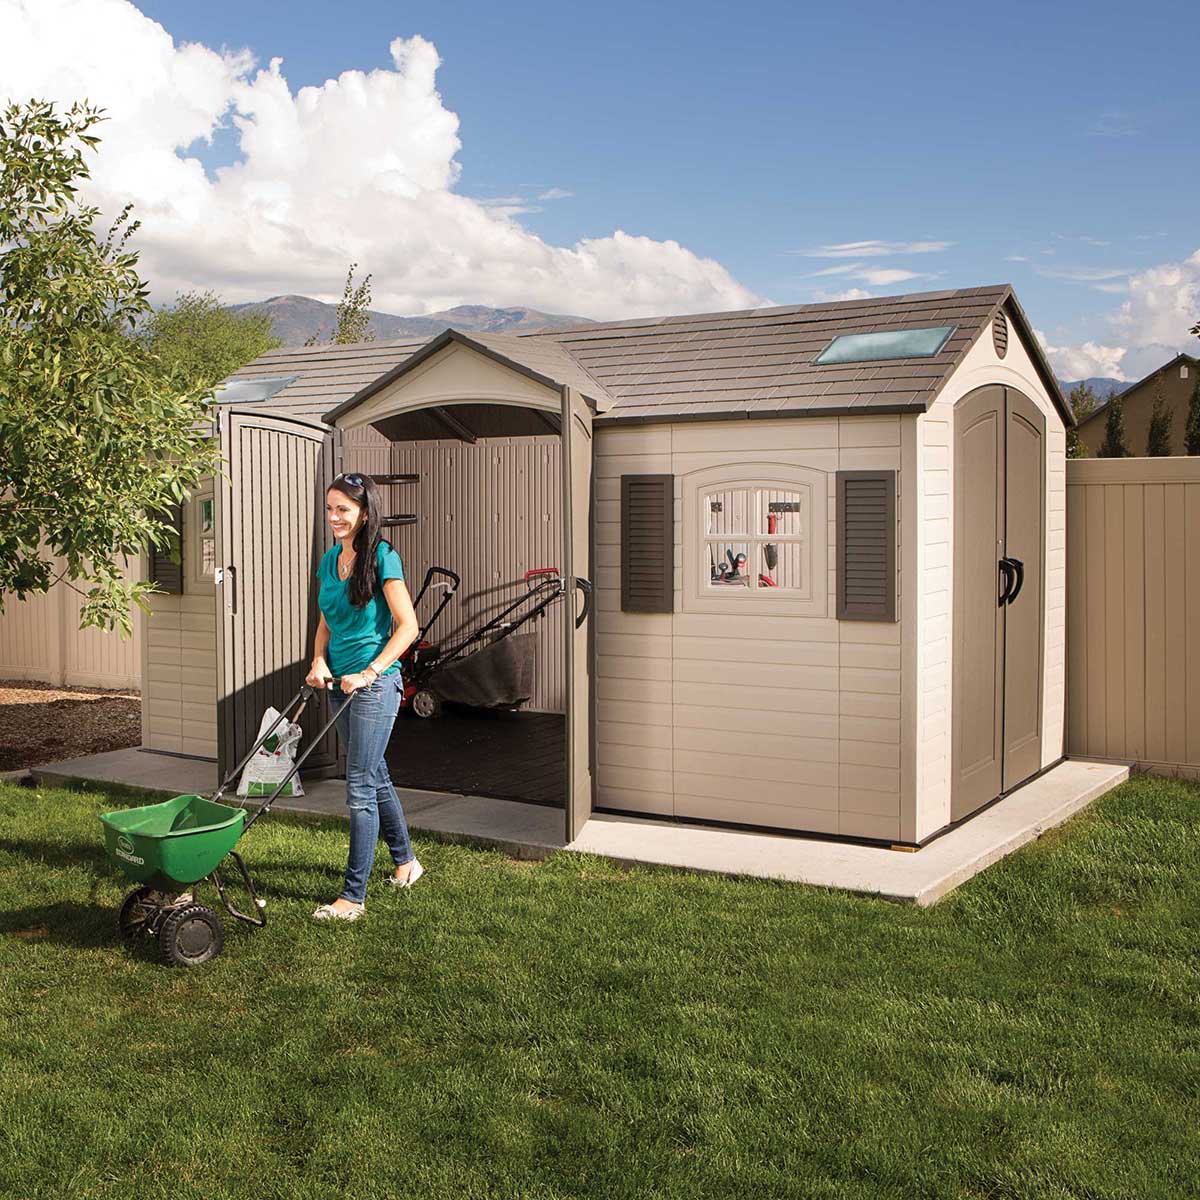 How To Move Storage Shed